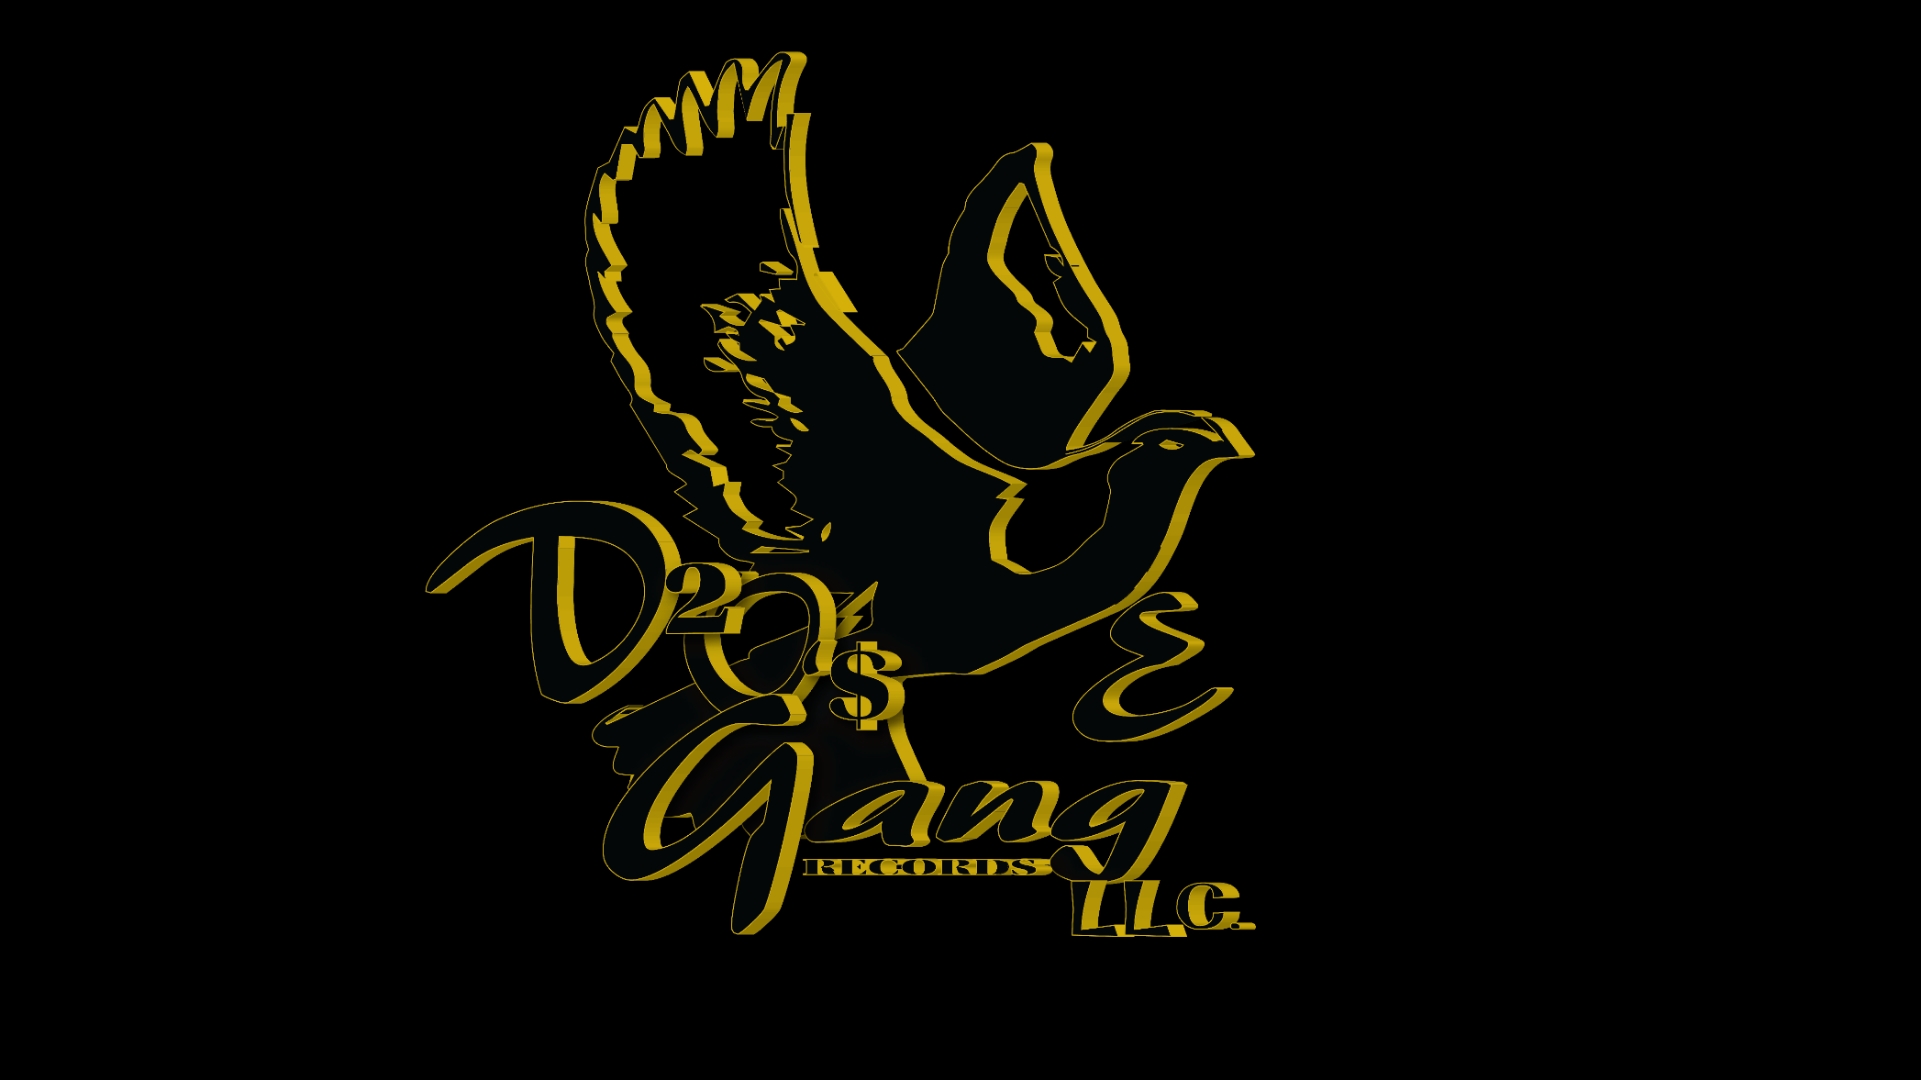 Get to know Dove Gang Records LLC - THE GRYND REPORT